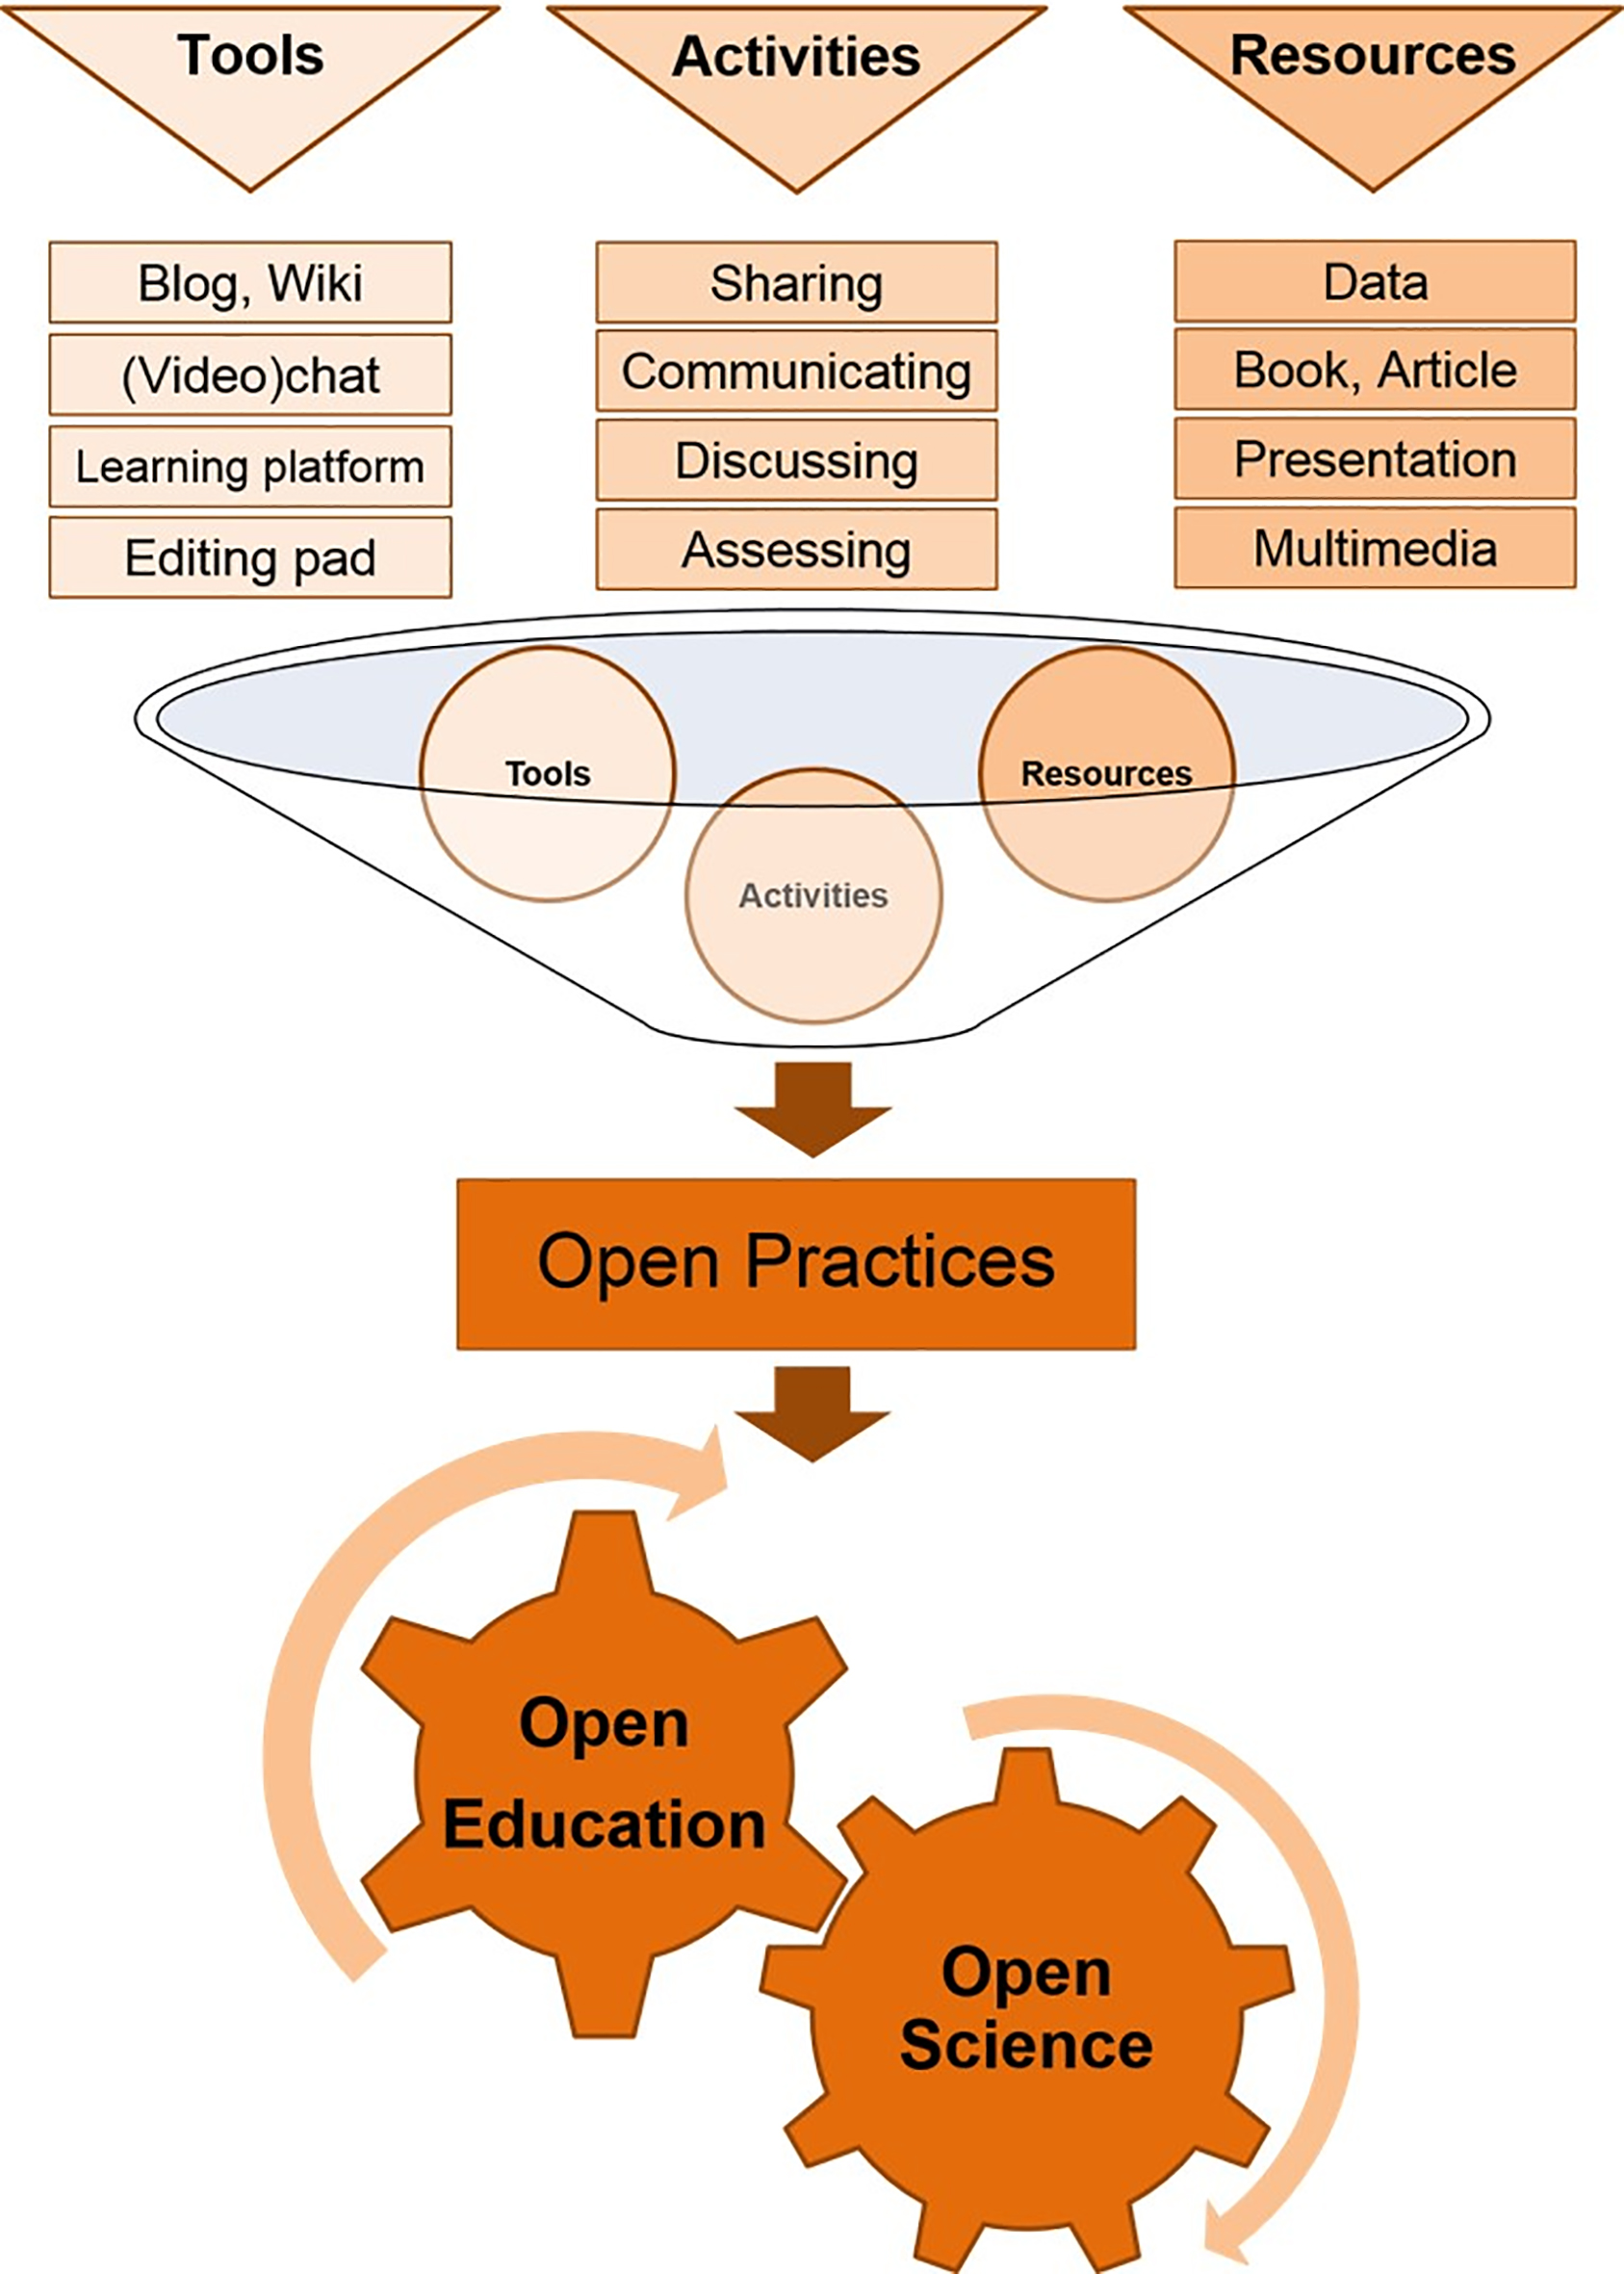 Open practices relevant for research and education.